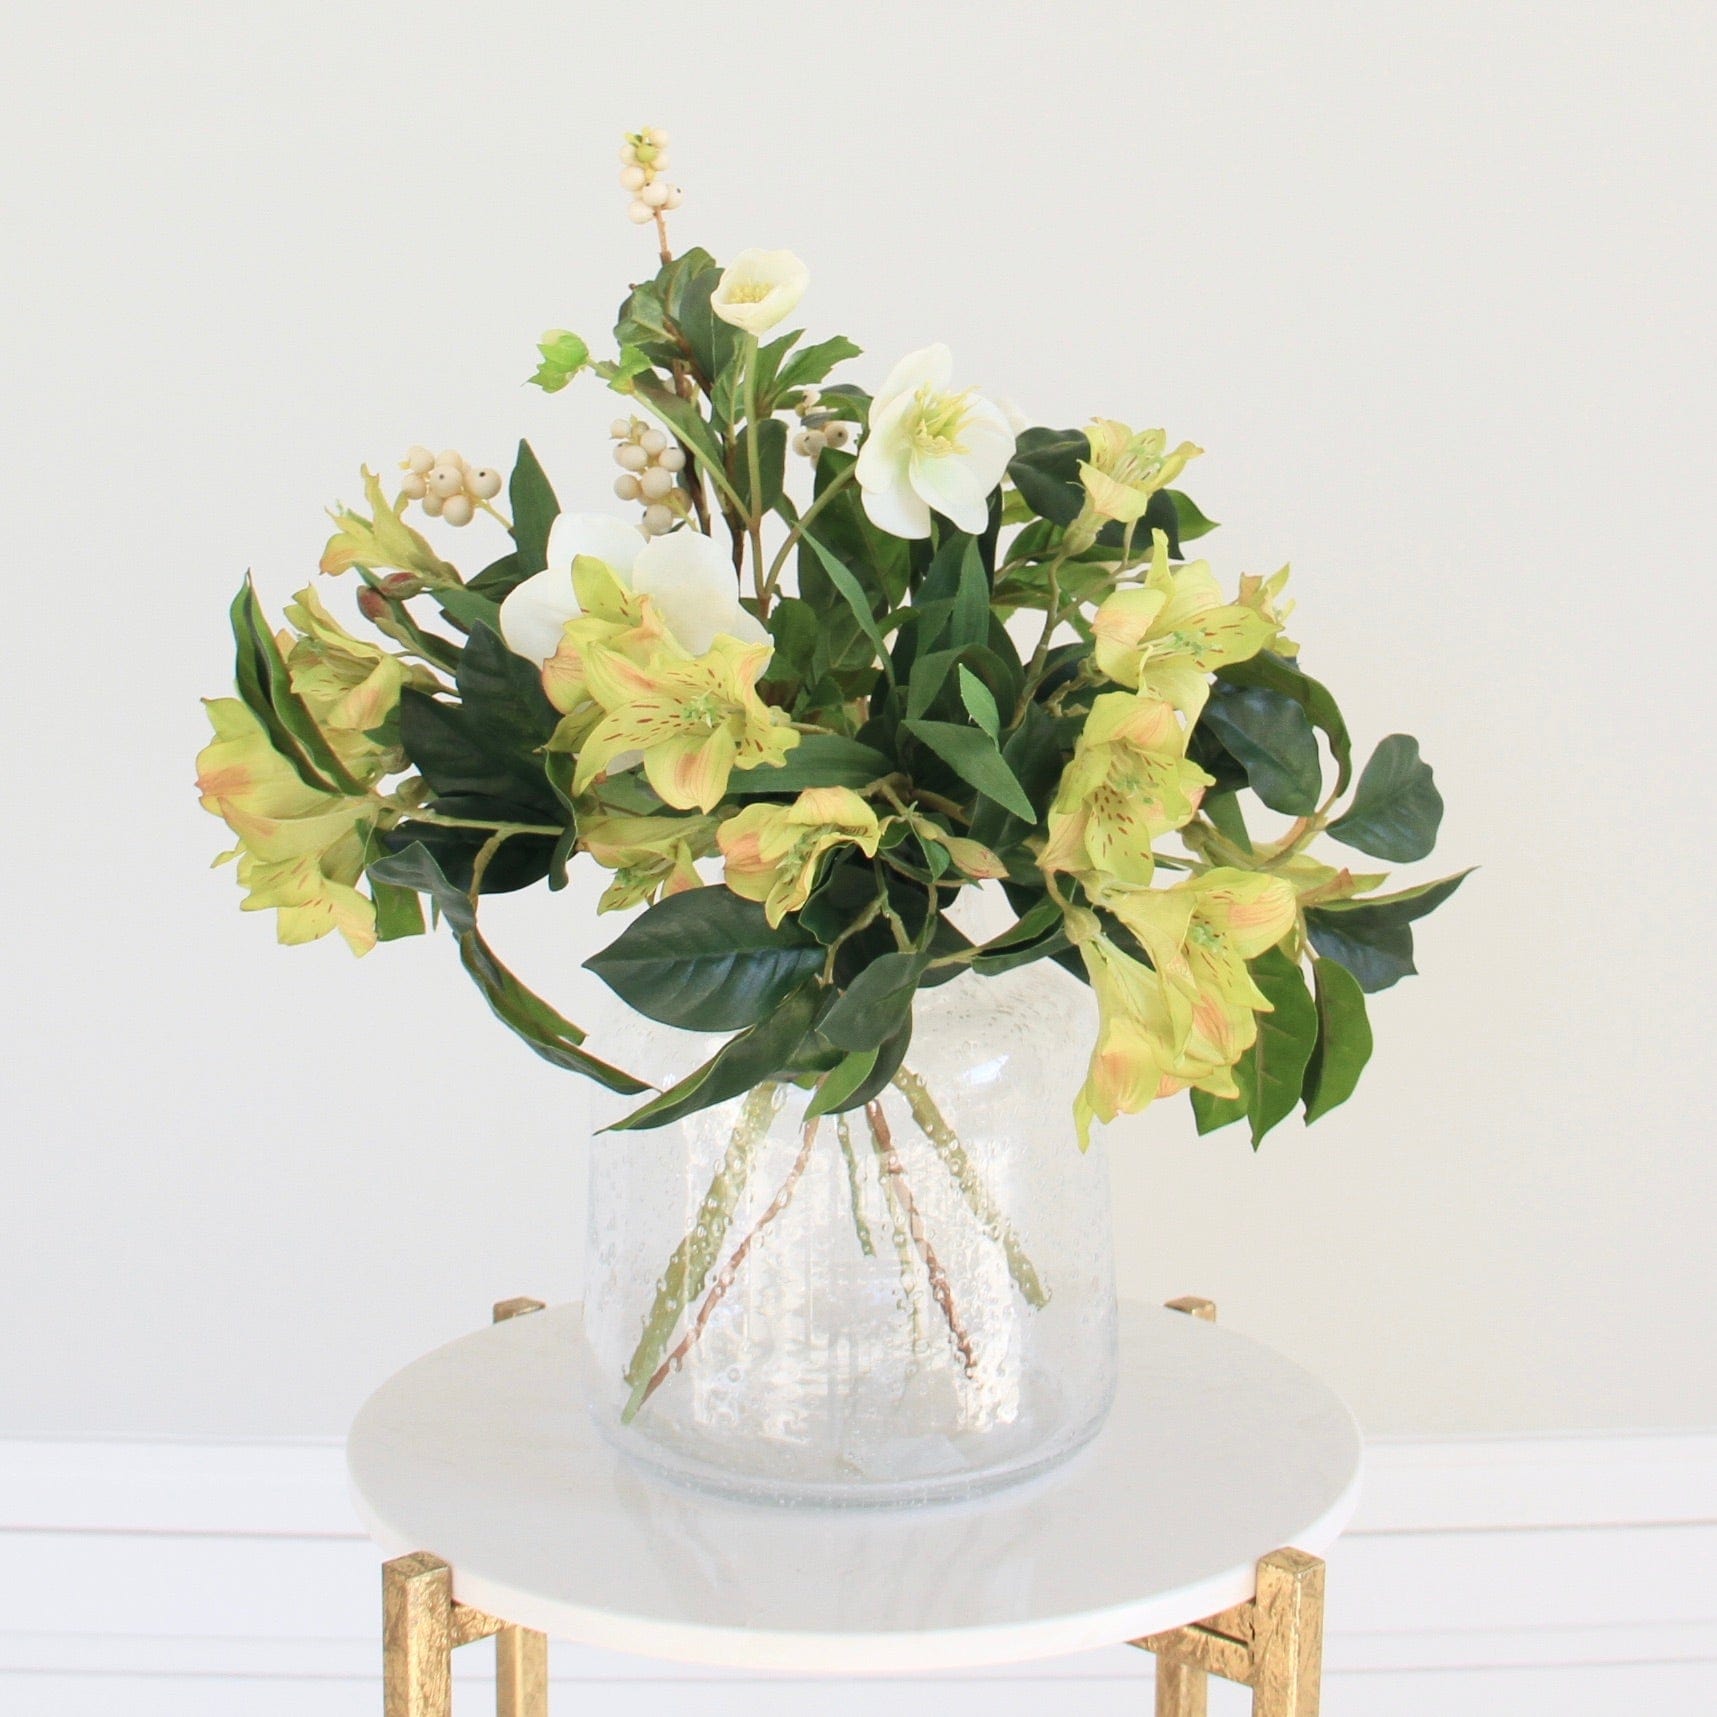 Artificial flowers luxury faux silk spring fresh bouquet lifelike realistic alstromeria hellebore flowers with vase from Amaranthine Blooms UK